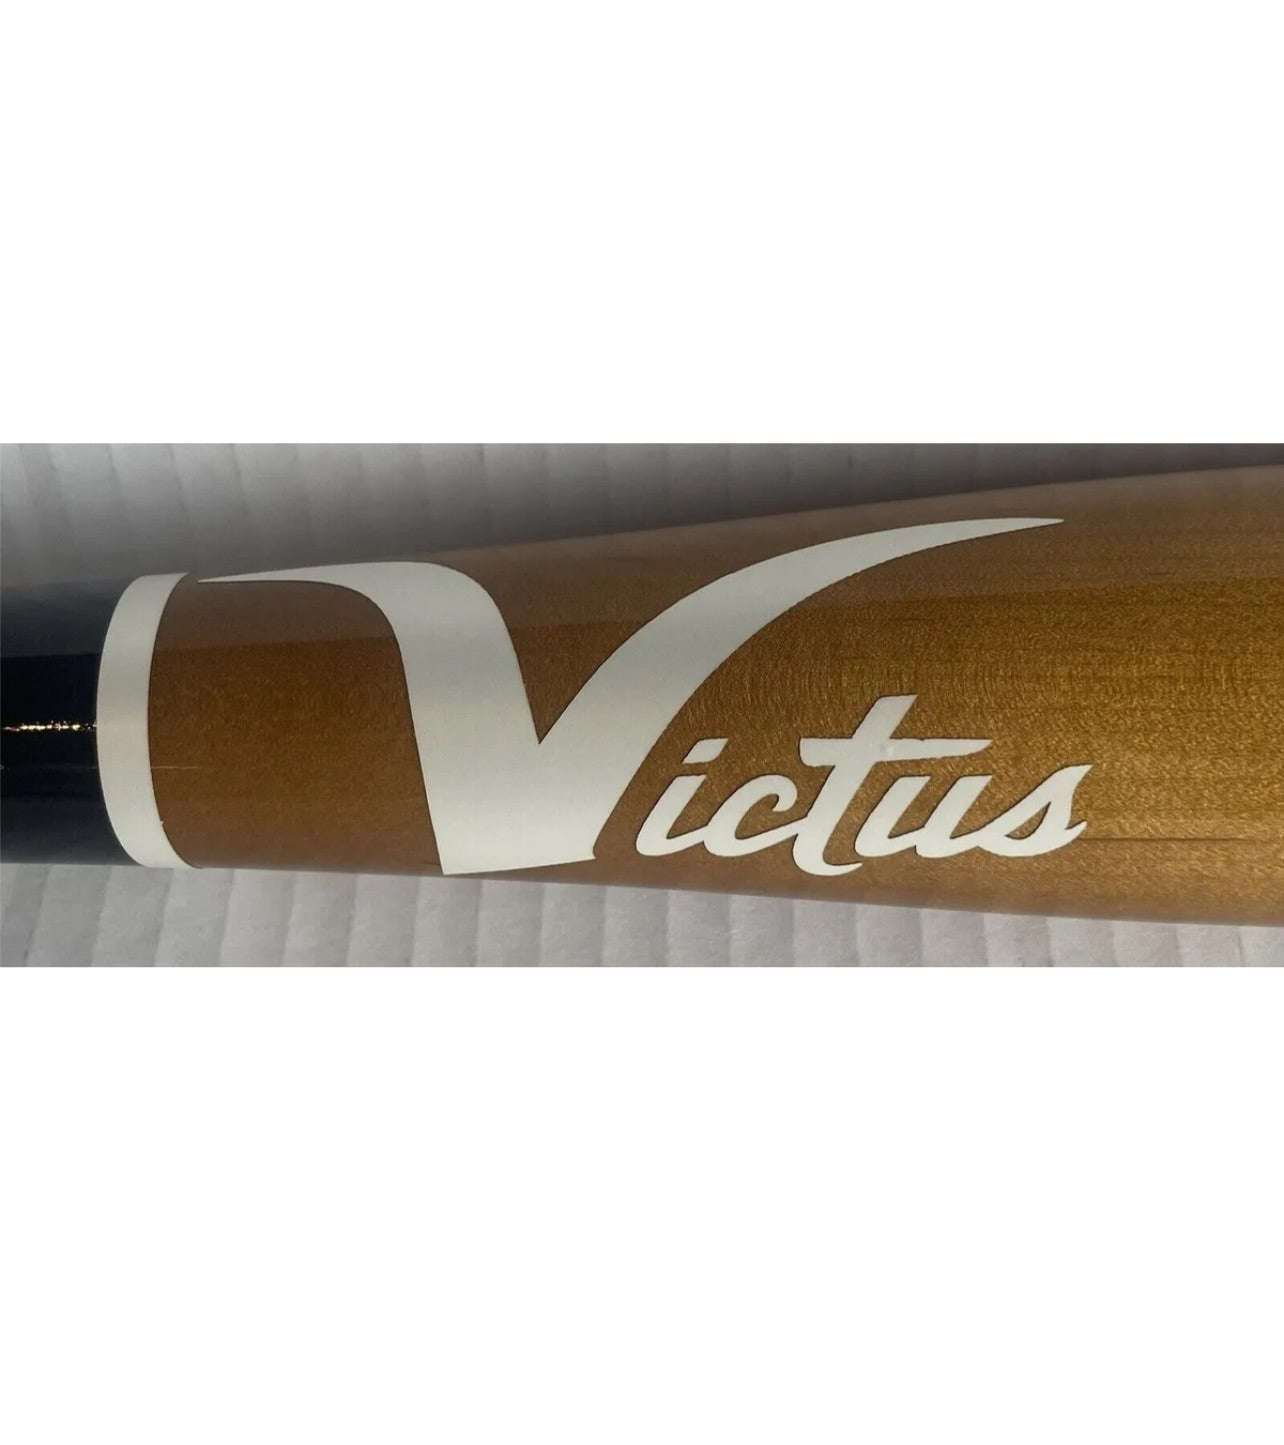 Anthony Volpe Yankees Signed Game Model Victus Bat Rookie Autograph Fanatics MLB